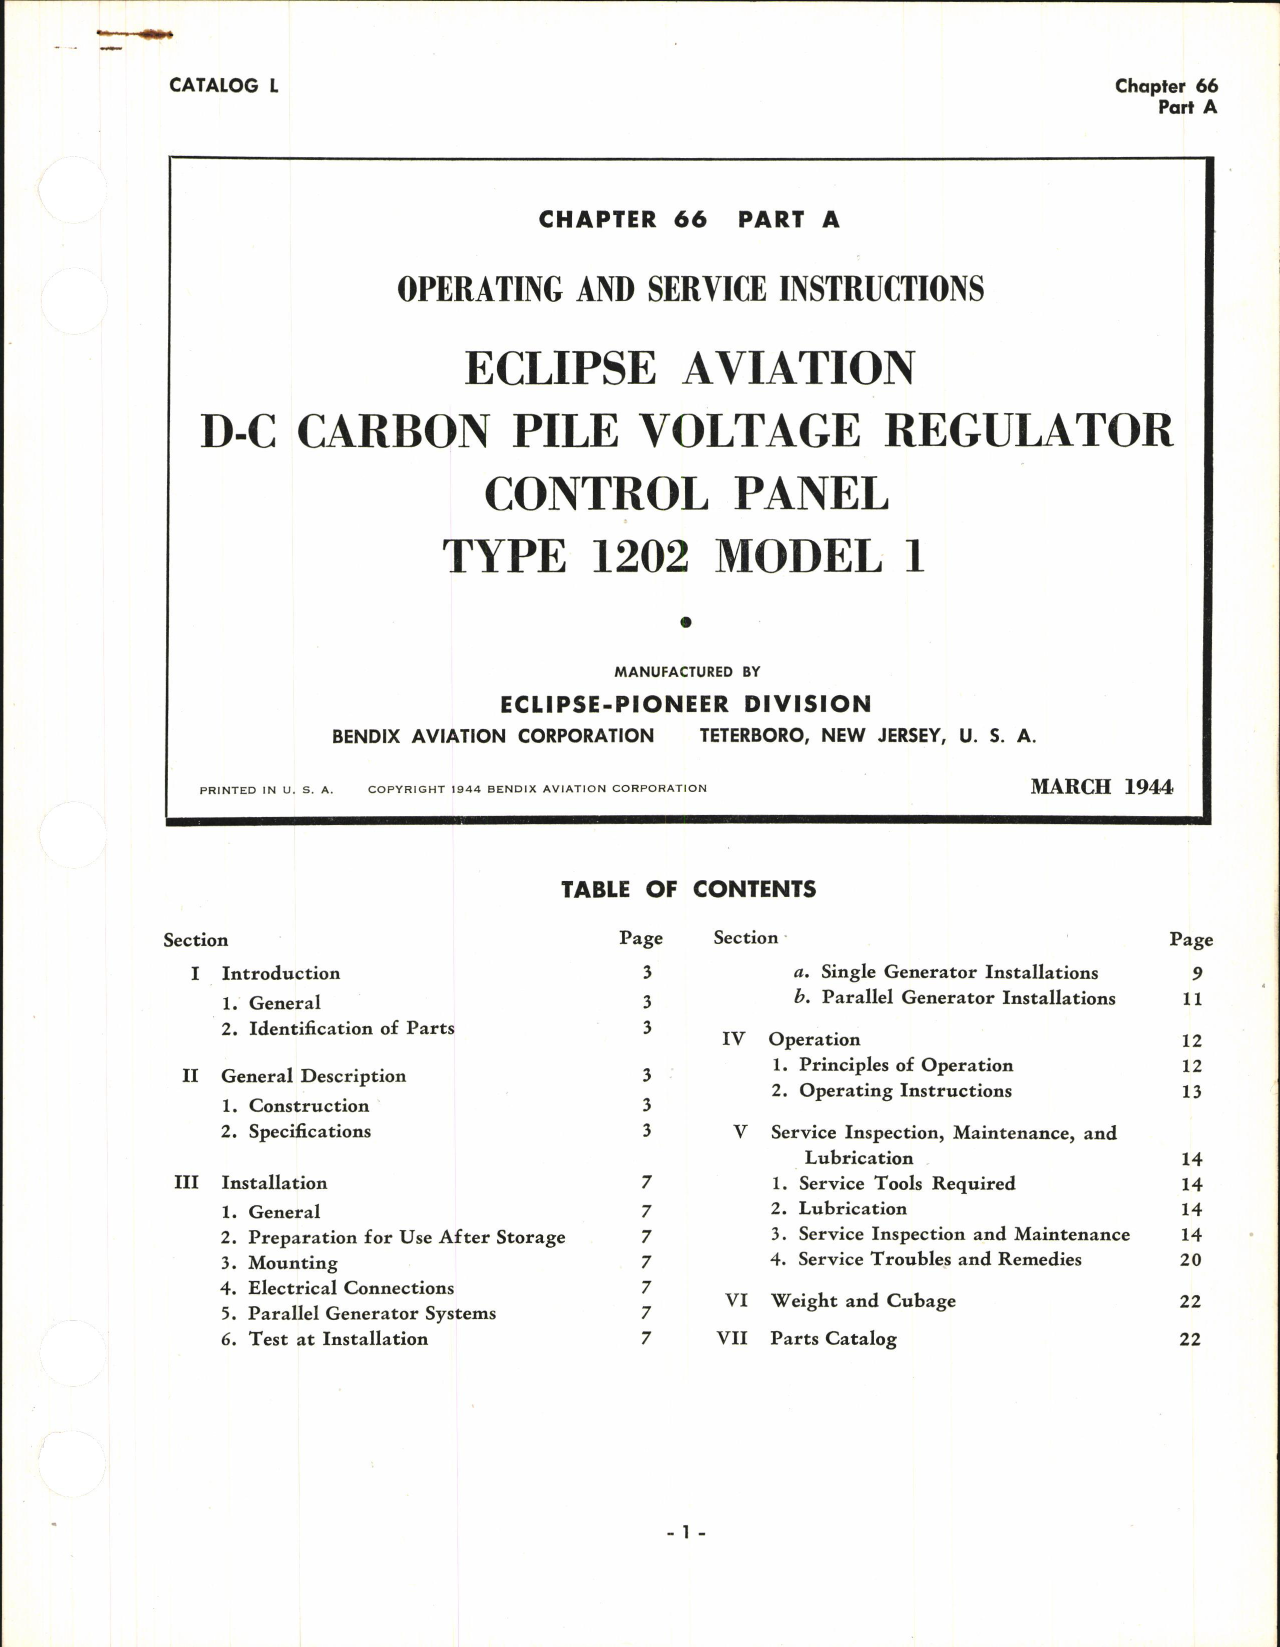 Sample page 1 from AirCorps Library document: Operating and Service Instructions for D-C Carbon Pile Voltage Regulator Control Panel Type 1202 Model 1